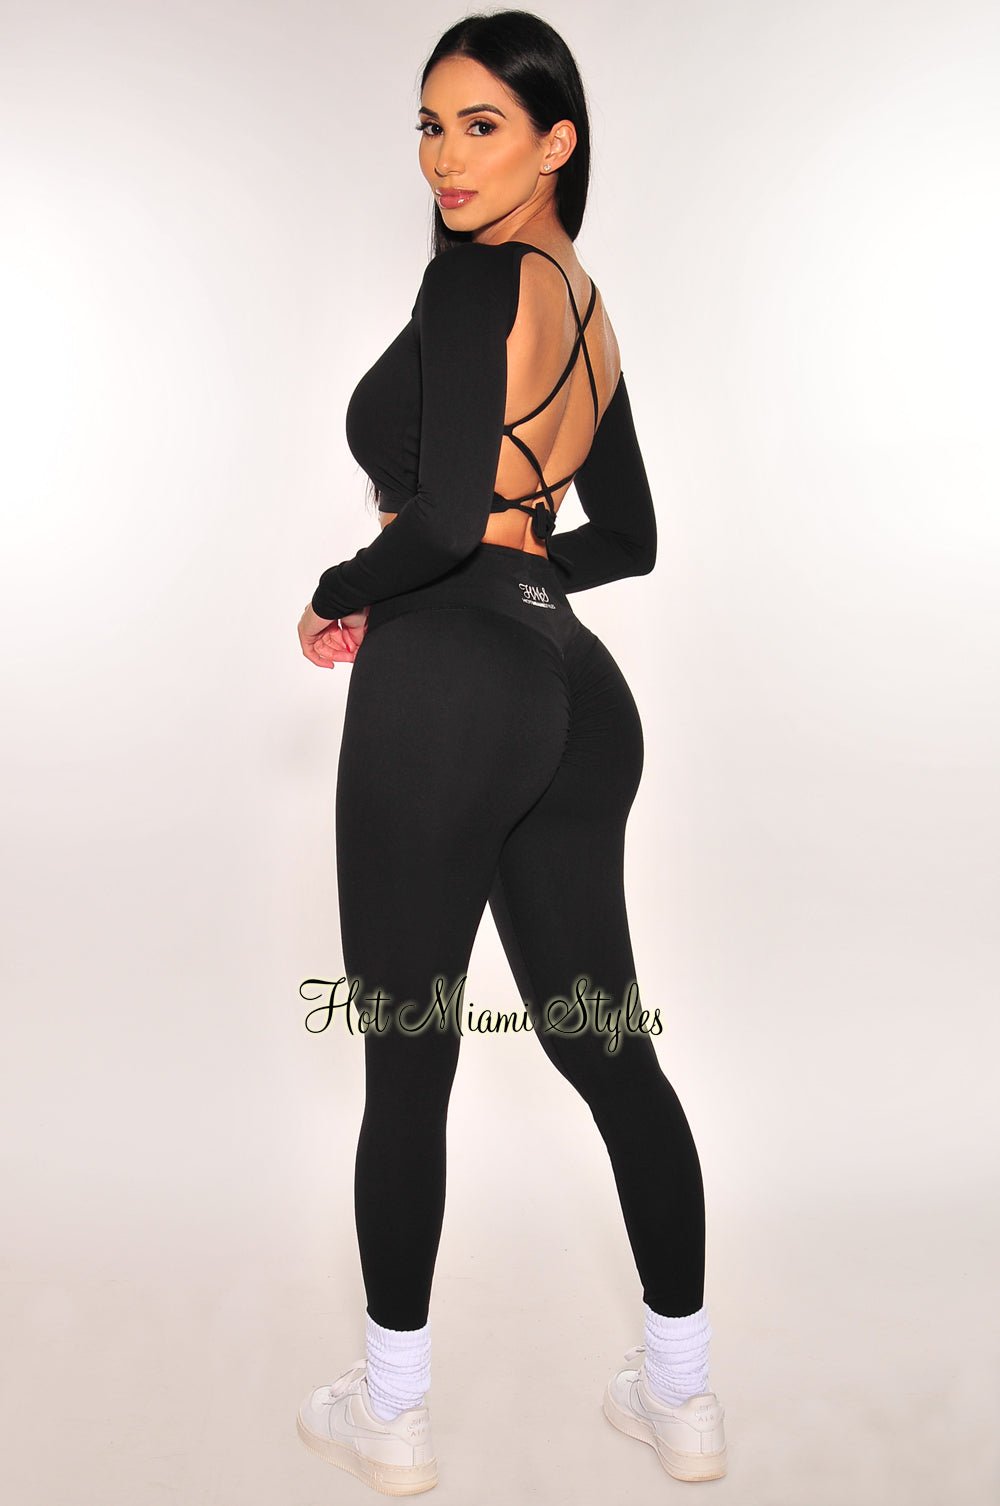 HMS Fit: Black Padded Long Sleeve Lace Up Back Scrunch Butt Leggings Two  Piece Set - Hot